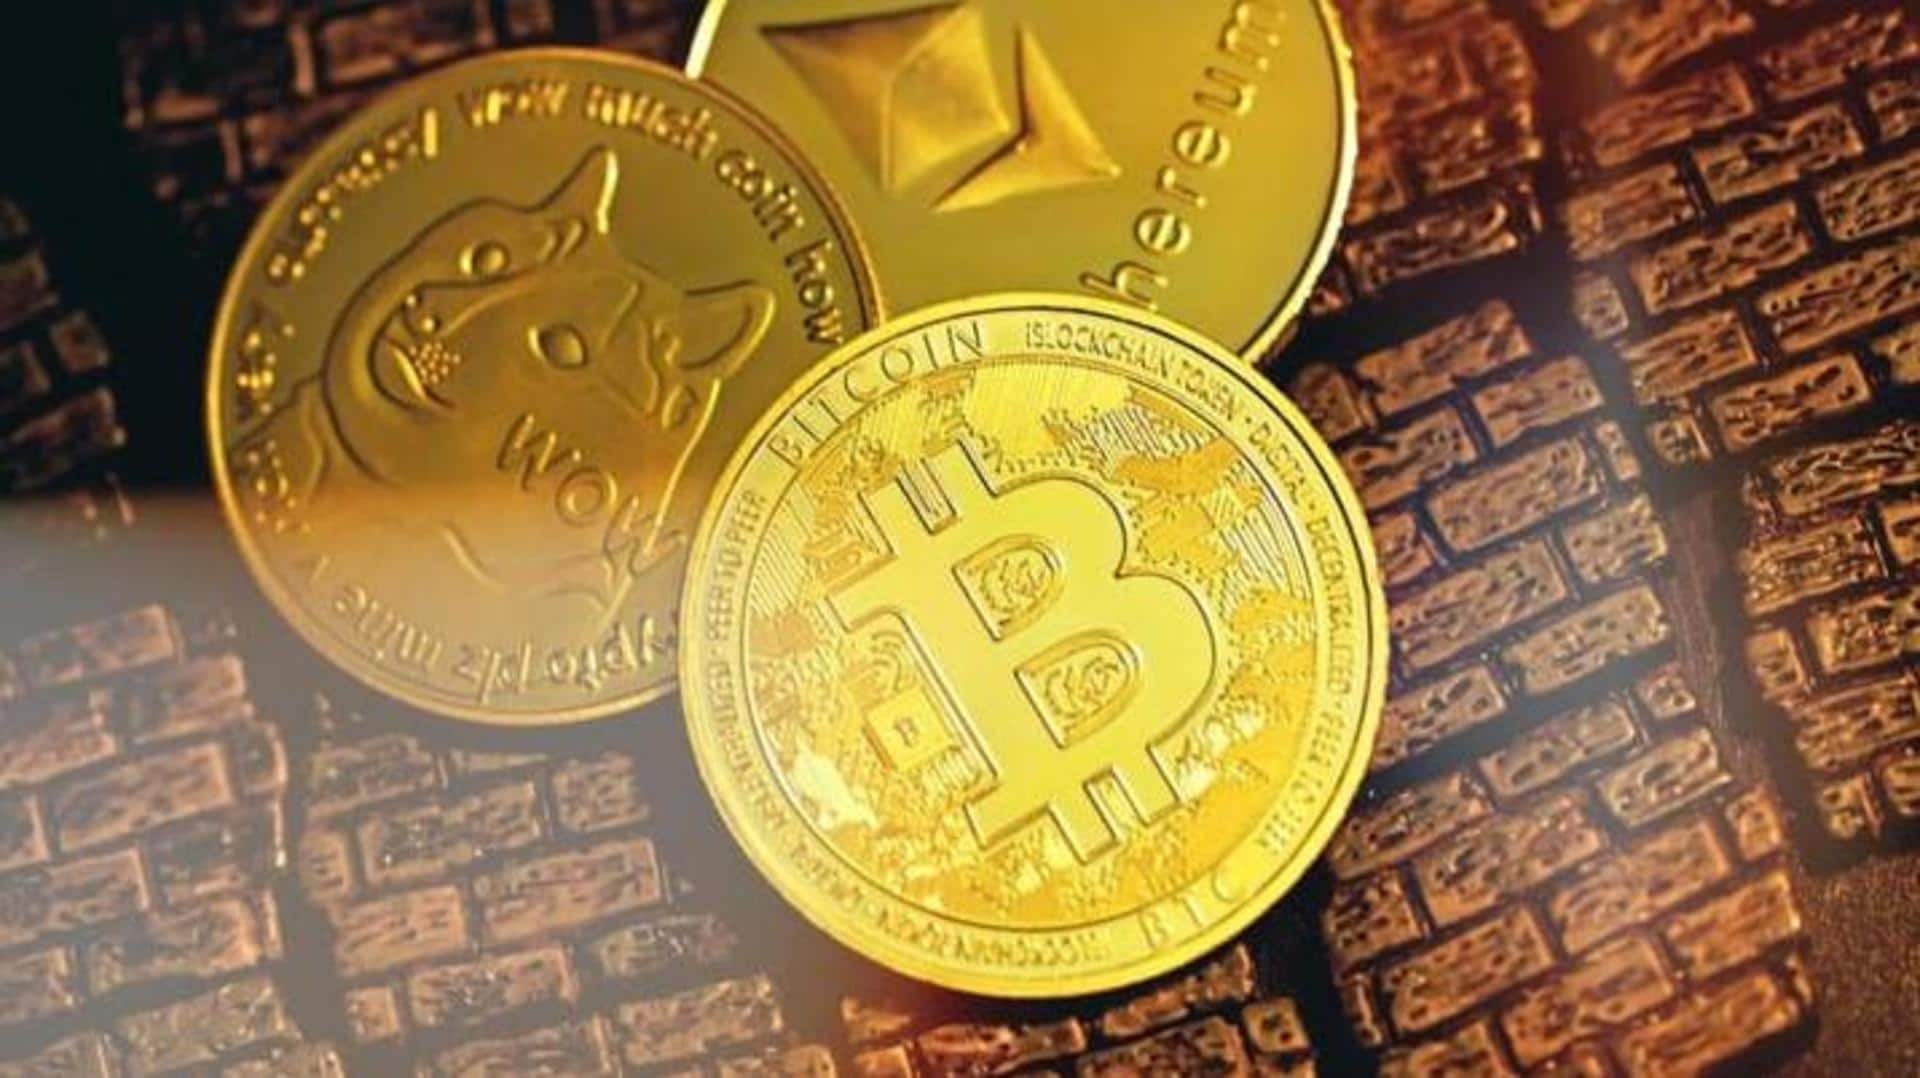 Cryptocurrency prices: Today's rates of Bitcoin, Ethereum, Dogecoin, Tether